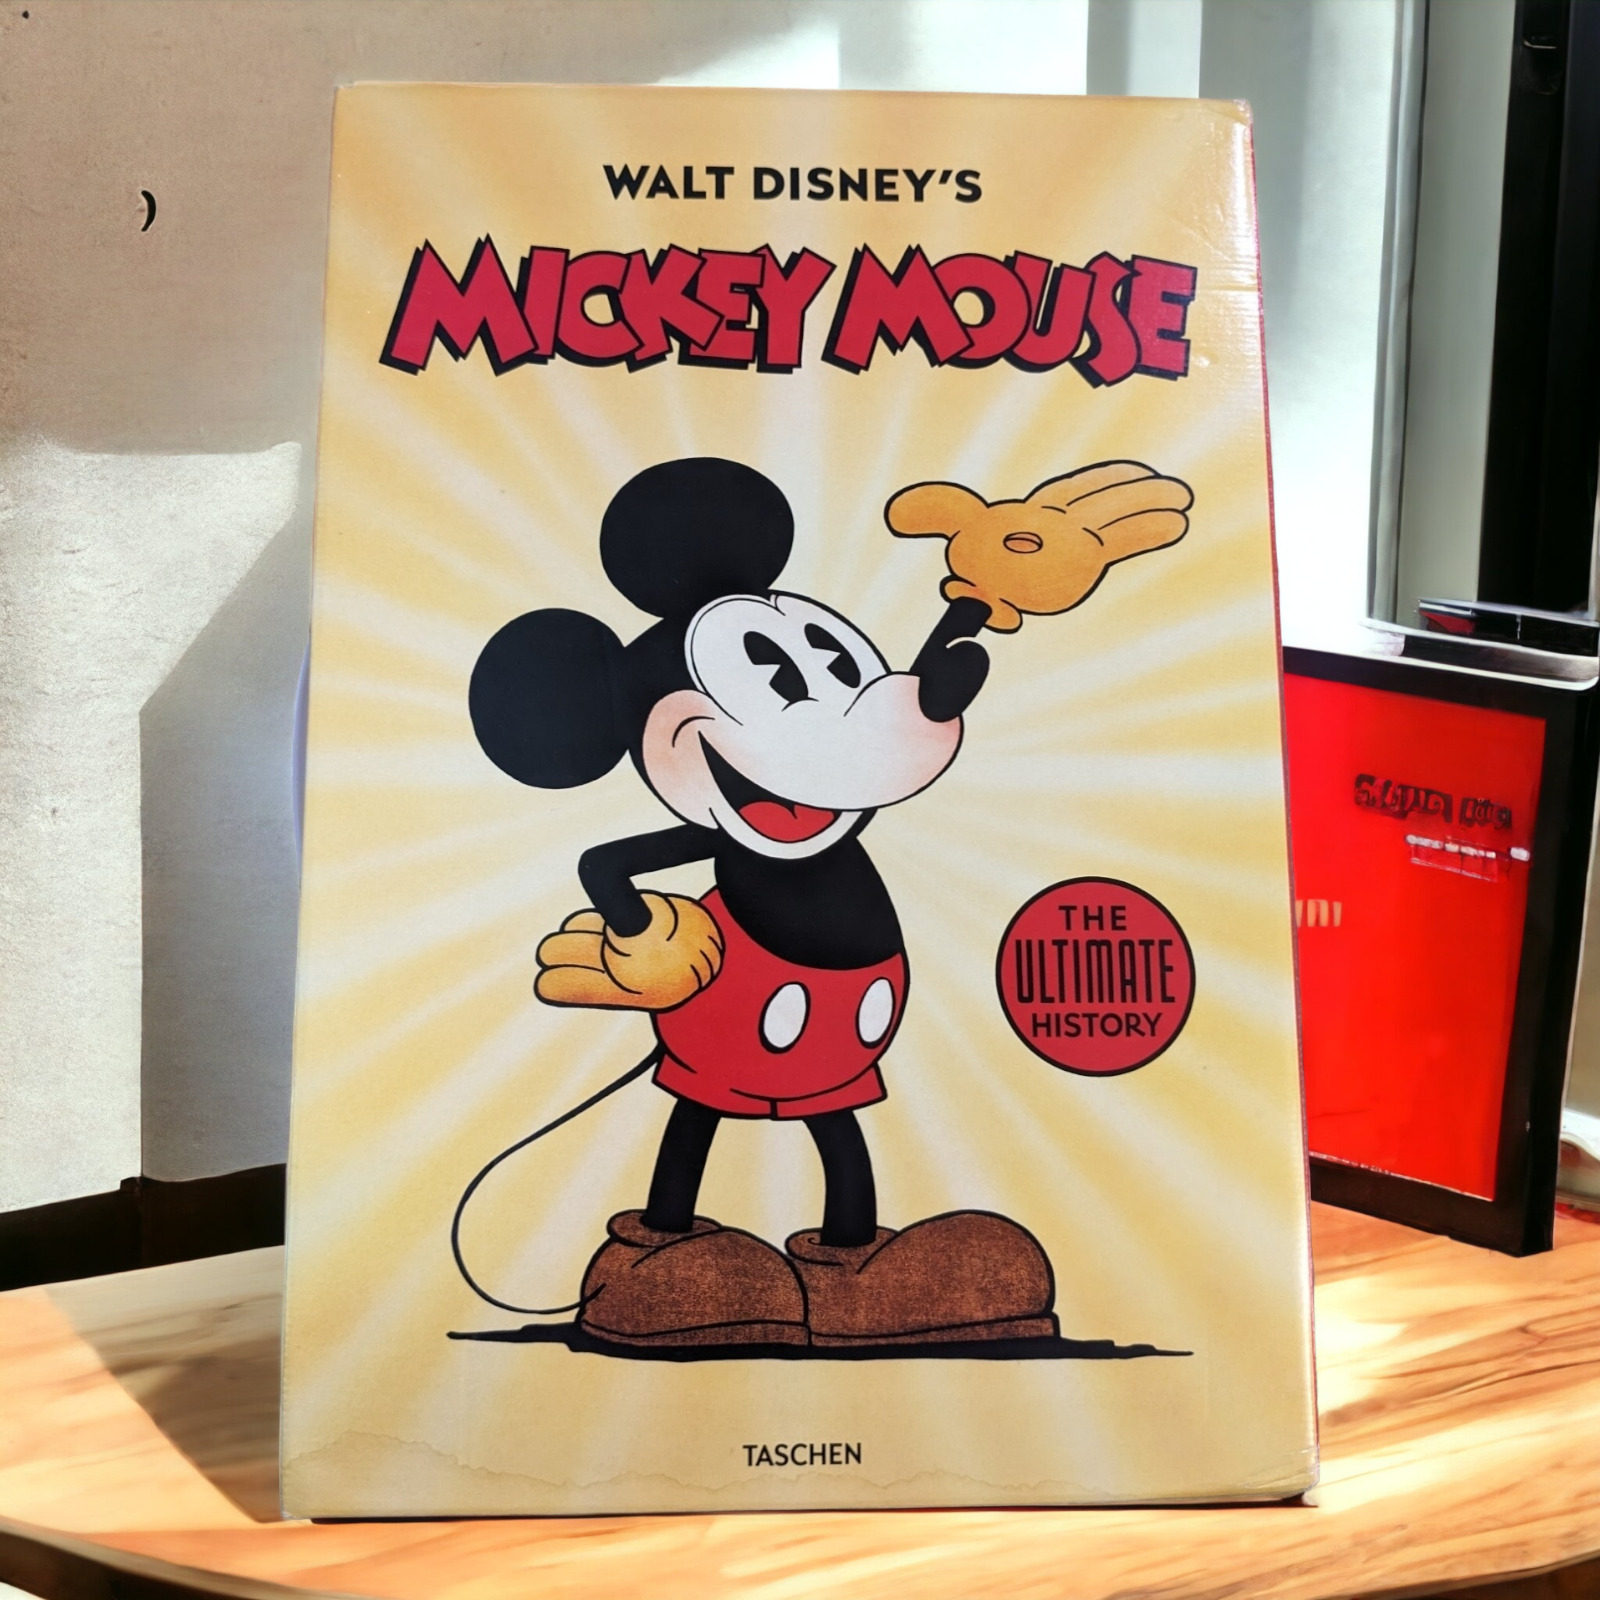 WALT DISNEY'S MICKEY MOUSE: THE ULTIMATE HISTORY HARDCOVER (TASCHEN, 2019)